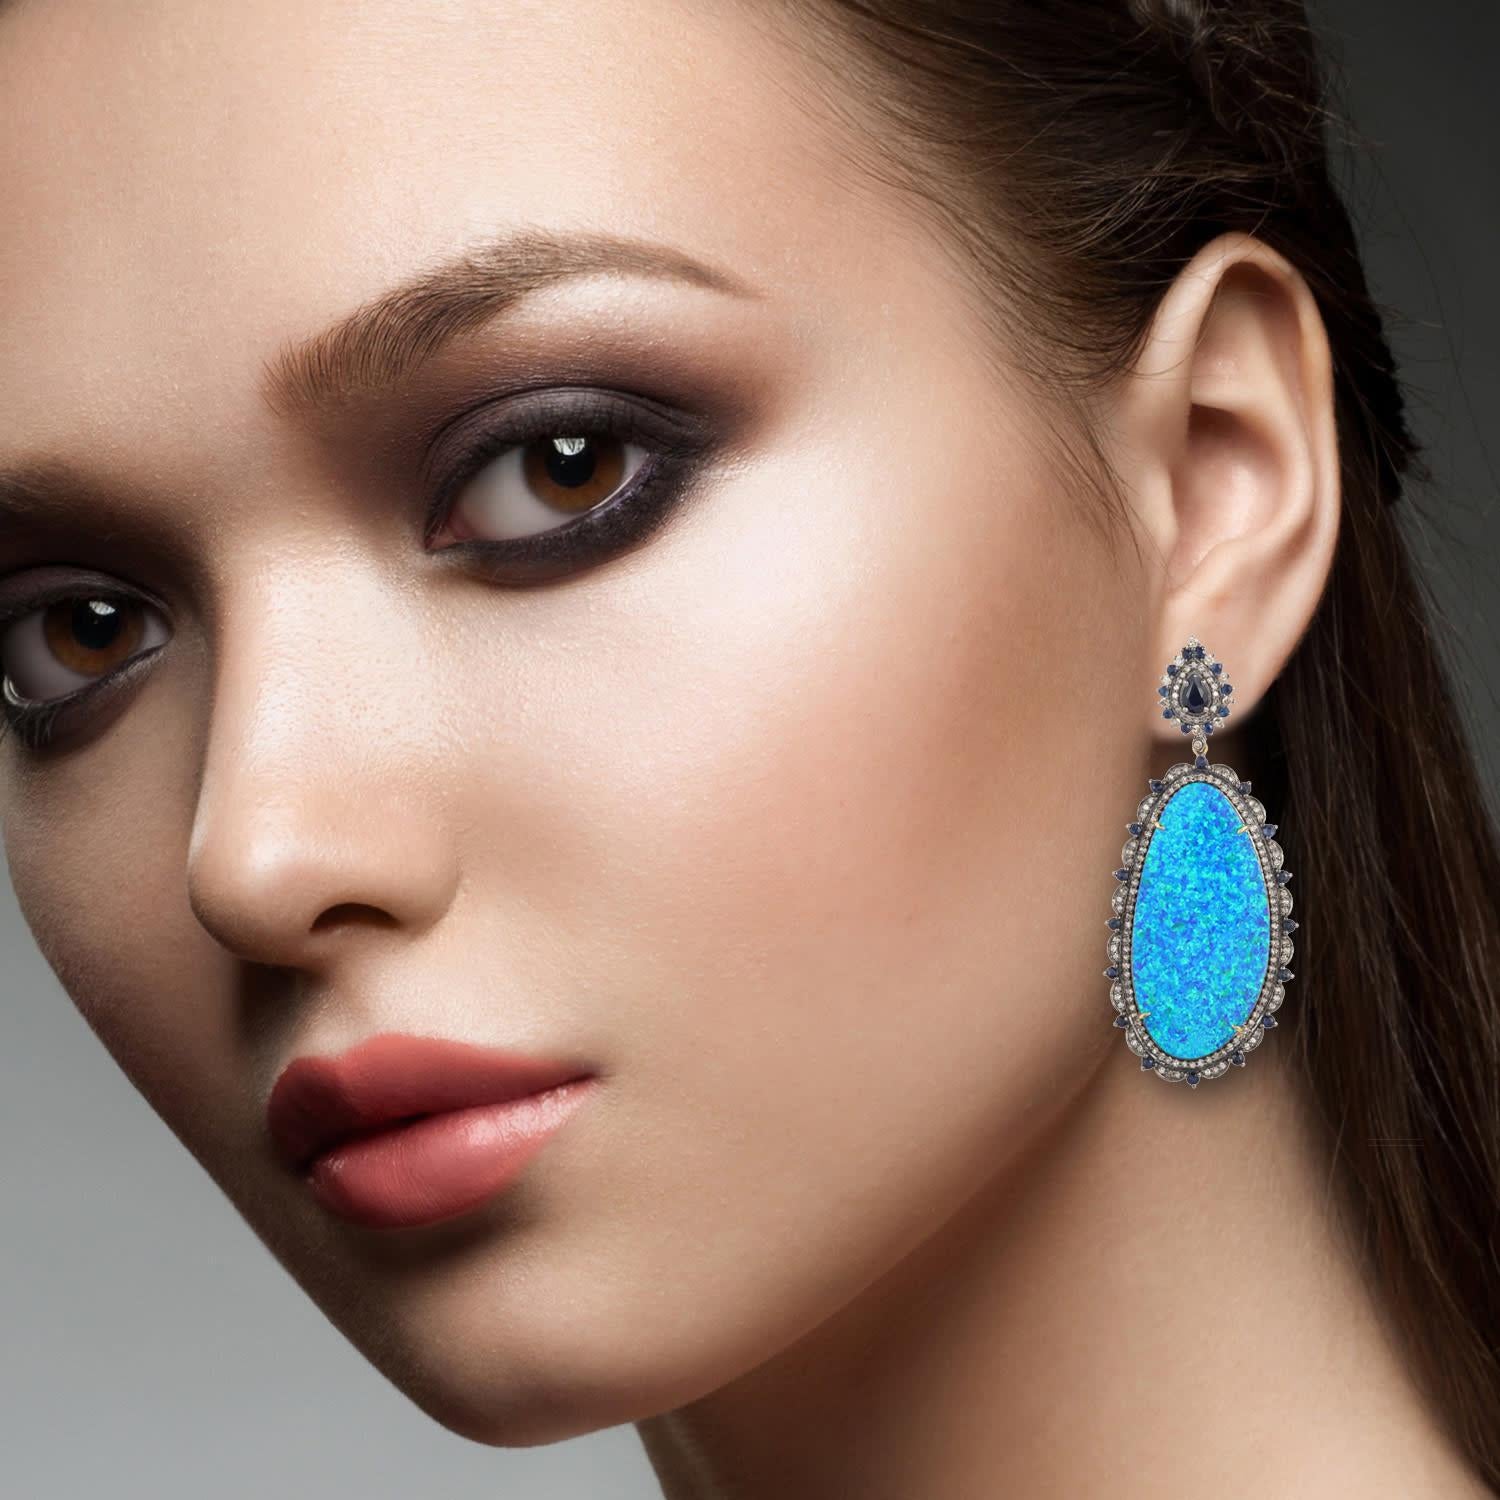 These stunning earrings are crafted in 18-karat gold and sterling silver. It is hand set in 21.38 carats opal doublets, 2.54 carats blue sapphire and 2.0 carats of diamonds. 

FOLLOW MEGHNA JEWELS storefront to view the latest collection & exclusive